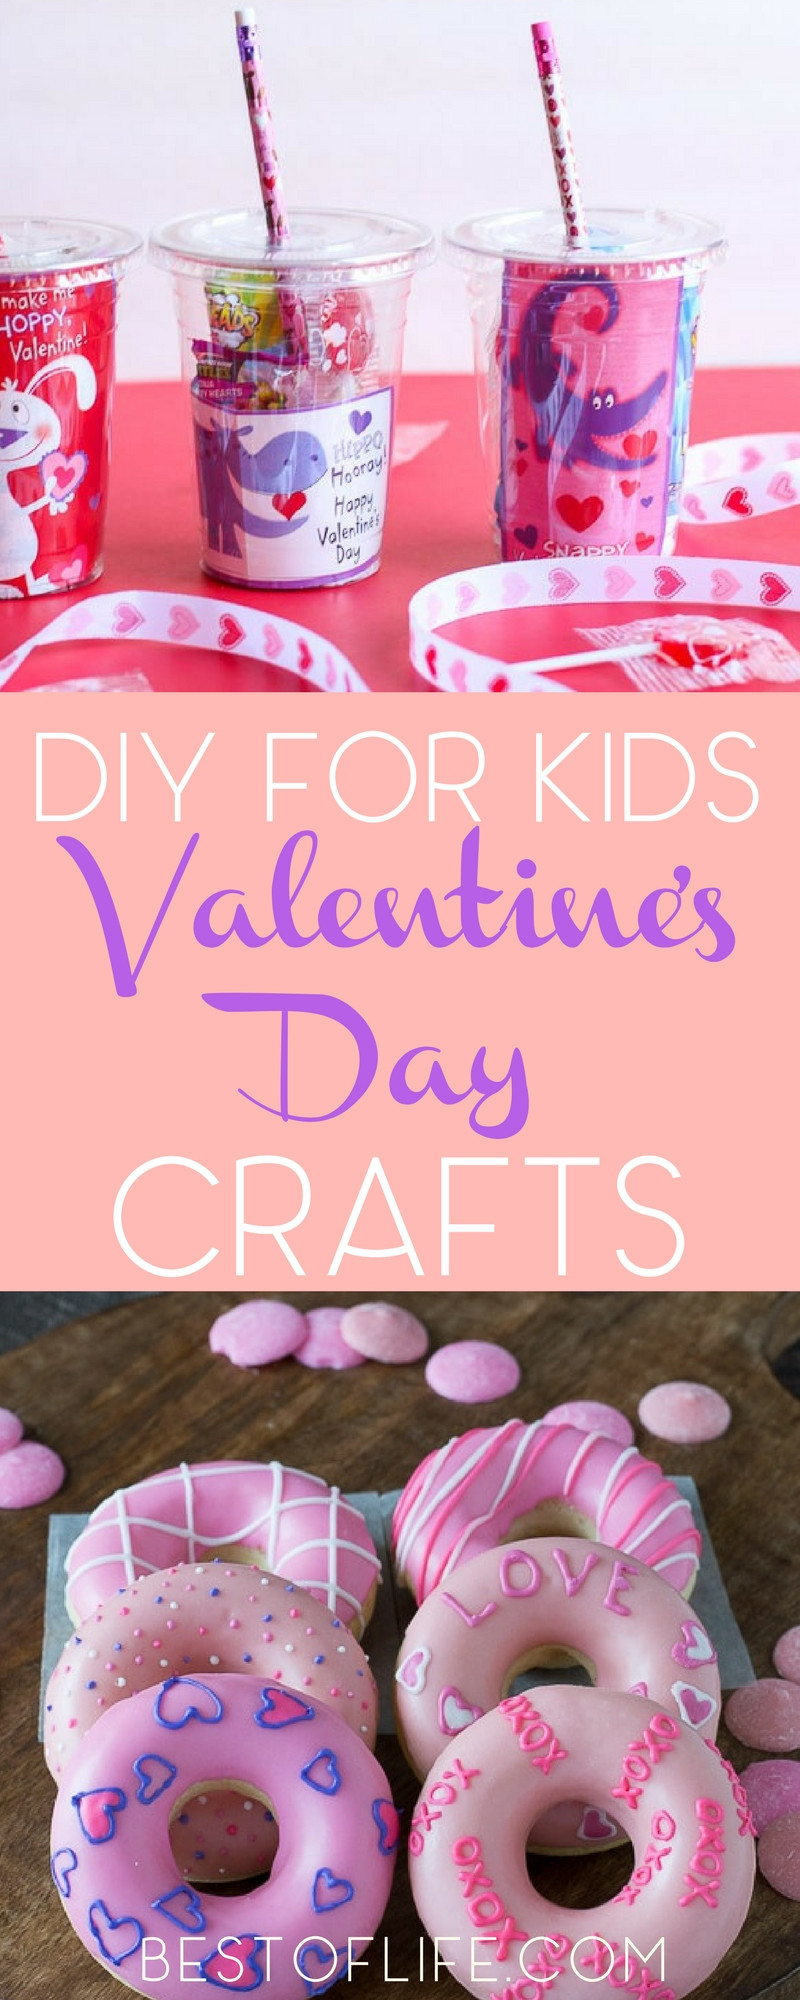 Valentine'S Day Craft Ideas For Toddlers
 35 DIY Valentines Day Crafts for Kids that Will Save